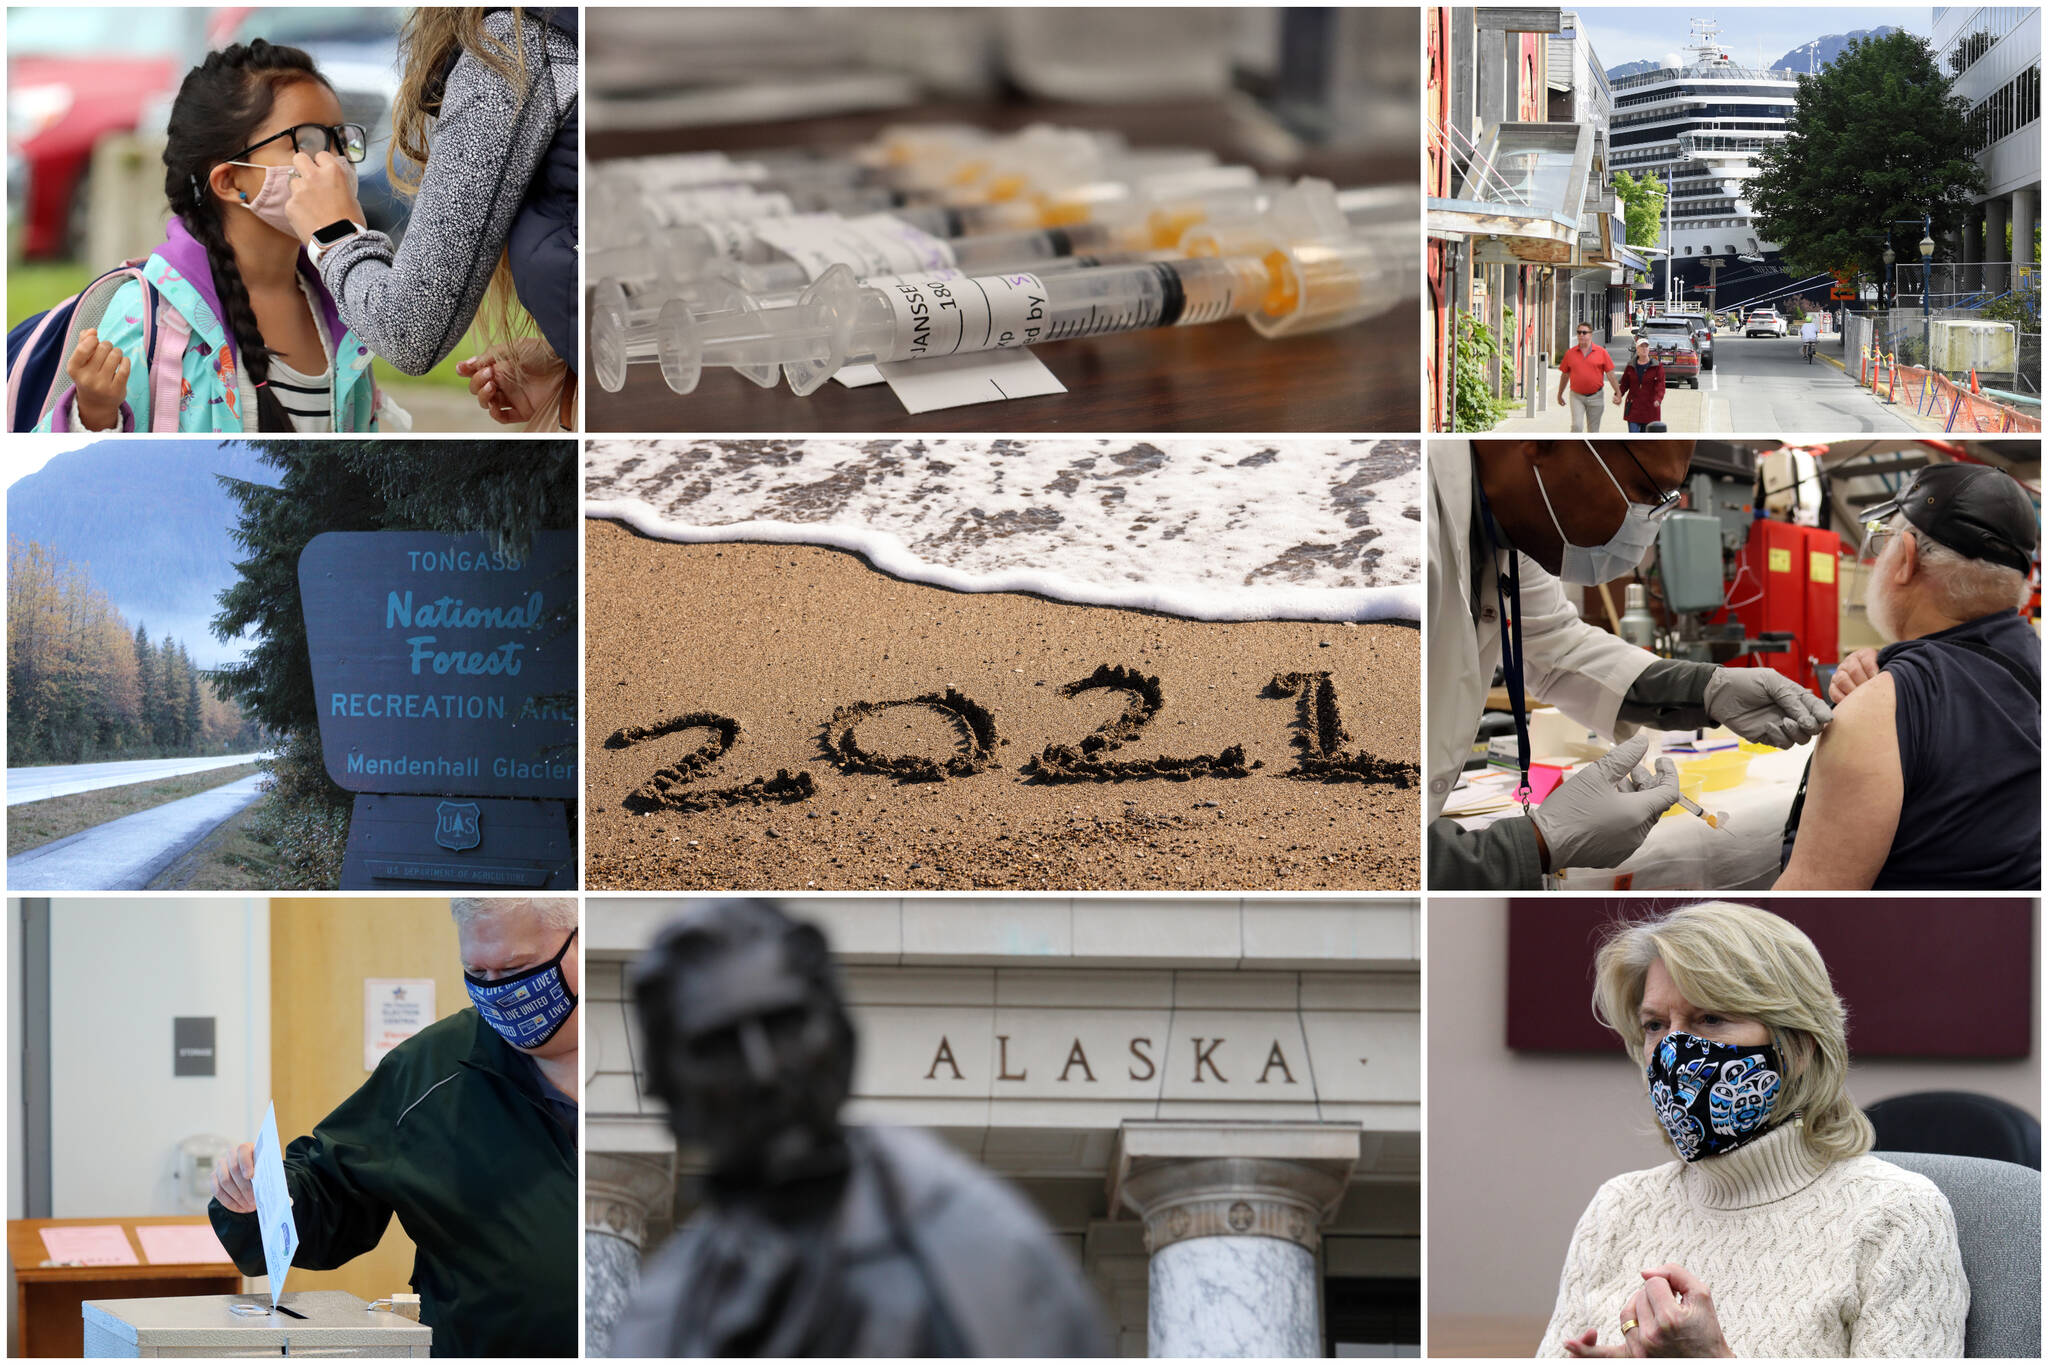 This combination image shows photos from stories that defined 2021. Top left, Vanessa Dickinson adjusts second grade student Kanani Dickinson’s glasses ahead of the first day of school. Top middle, doses of COVID-19 vaccination await arms during a vaccine clinic. Top right, a cruise ship looms large over downtown Juneau. Middle left, a sign marks the Mendenhall Glacier Recreation Area as part of the Tongass National Forest. Middle, the bygone calendar year is written in the sand. Middle right, Alan Salsman receives the Johnson & Johnson COVID-19 vaccine from VA nurse Michael Addo at Coast Guard Station Juneau. Bottom left, School board member Emil Mackey casts a ballot in Juneau’s municipal election. Bottom middle, the Alaska State Capitol stands behind a statue of William H. Seward. Bottom left, Sen. Lisa Murkowski talks during a sitdown in the Empire offices. (Juneau Empire Photos, Engin Akyurt / Unsplash)